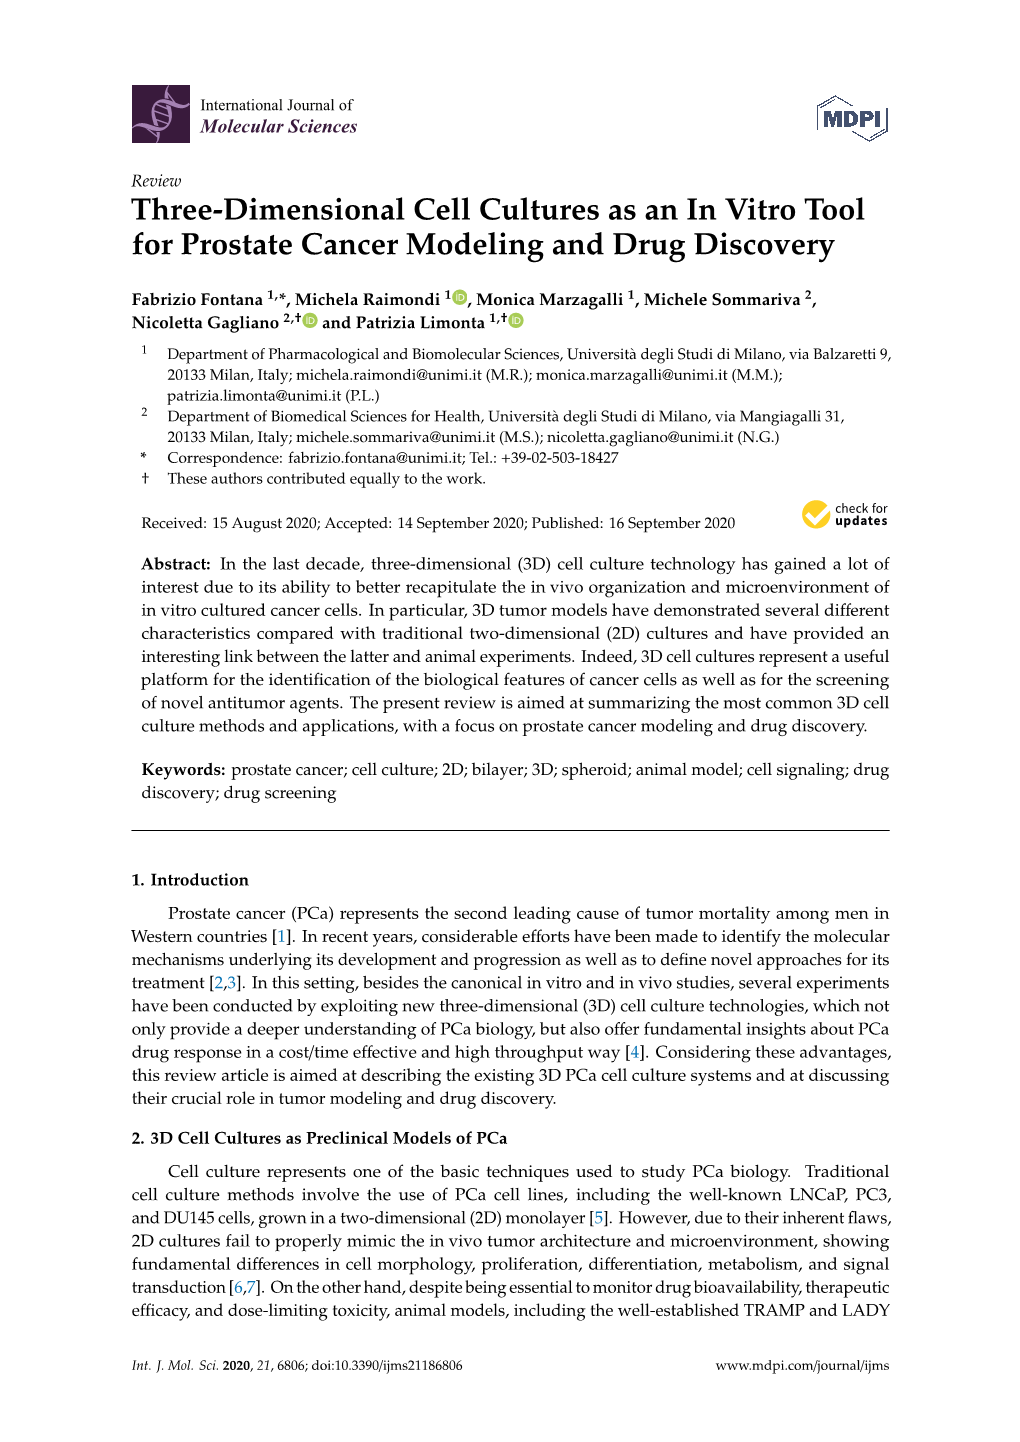 Three-Dimensional Cell Cultures As an in Vitro Tool for Prostate Cancer Modeling and Drug Discovery